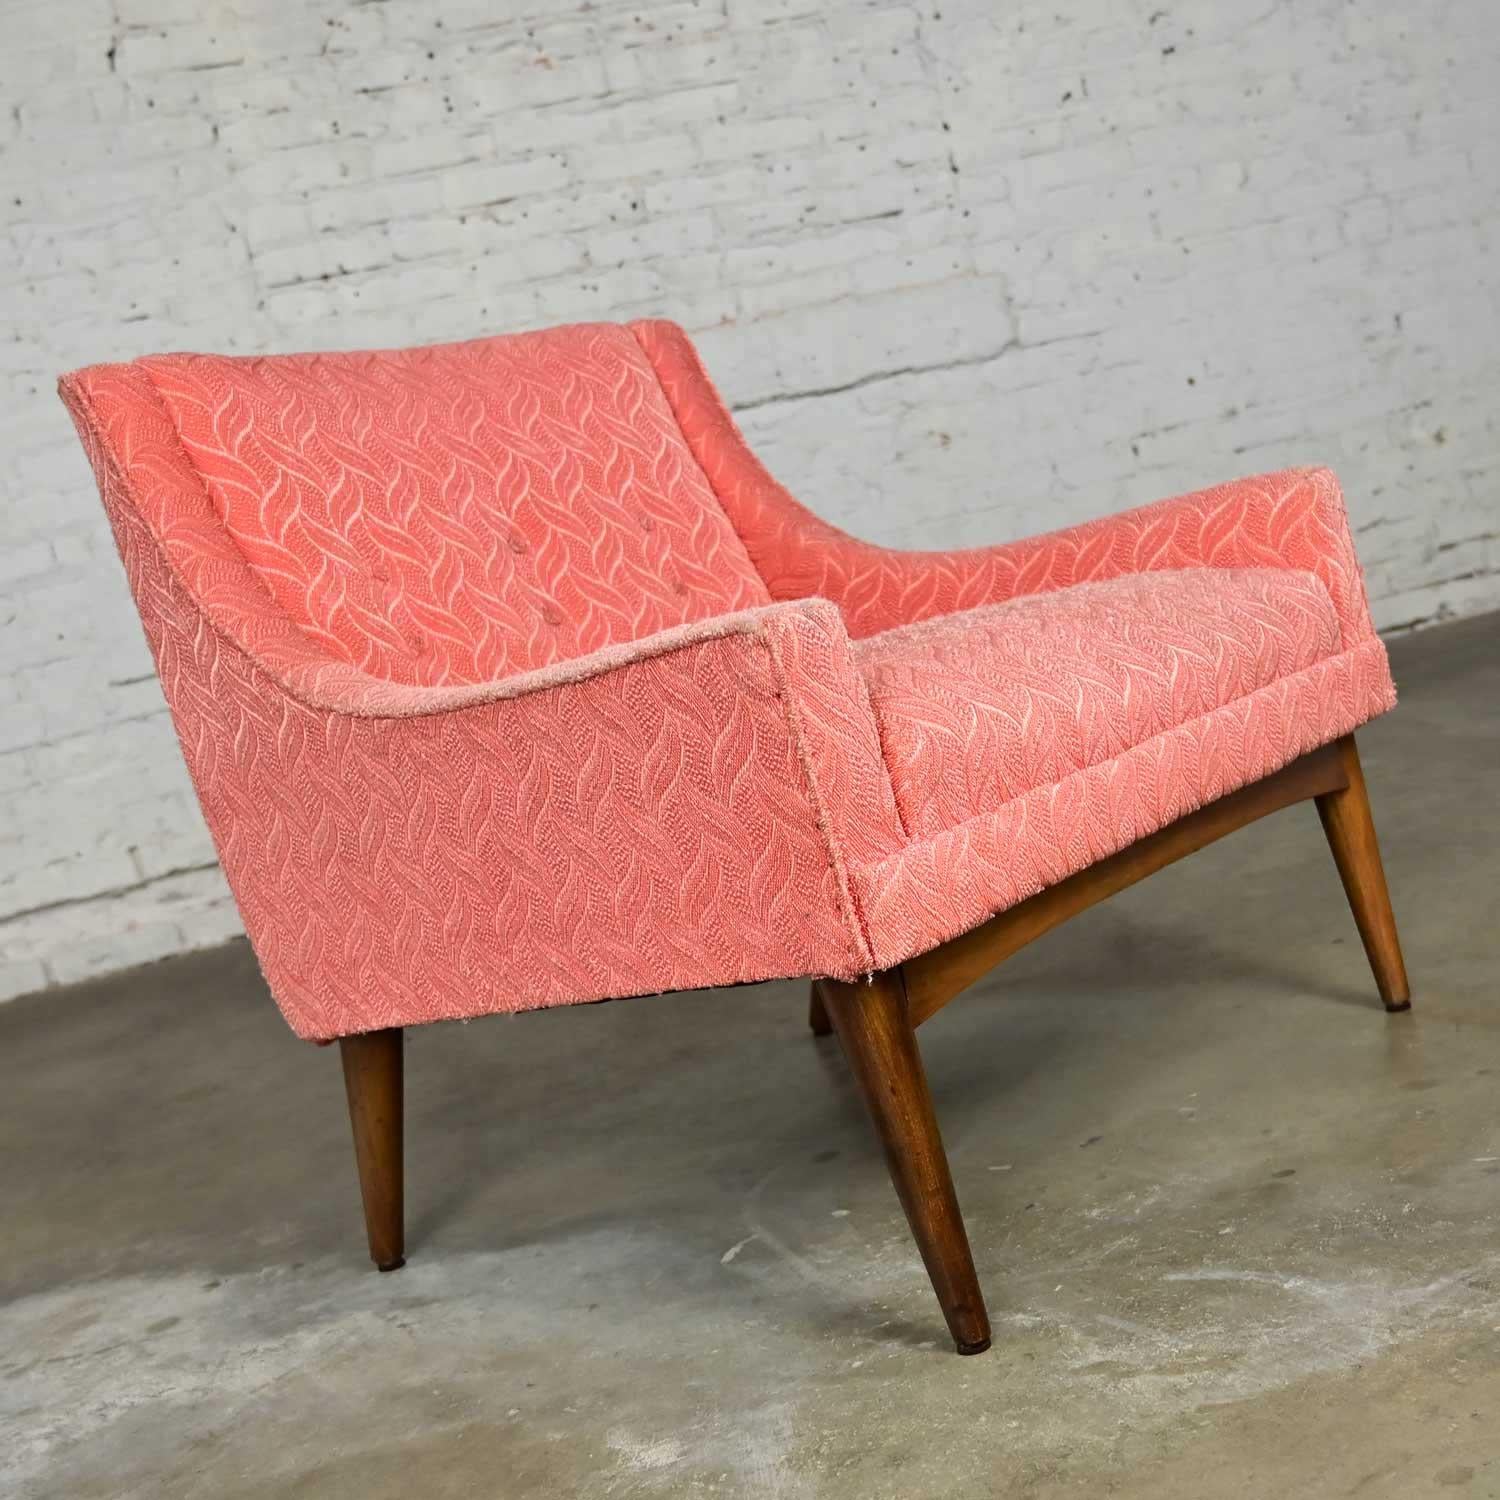 Vintage Mid-Century Modern Coral Frieze Upholstered Modified Slipper Chair In Good Condition For Sale In Topeka, KS